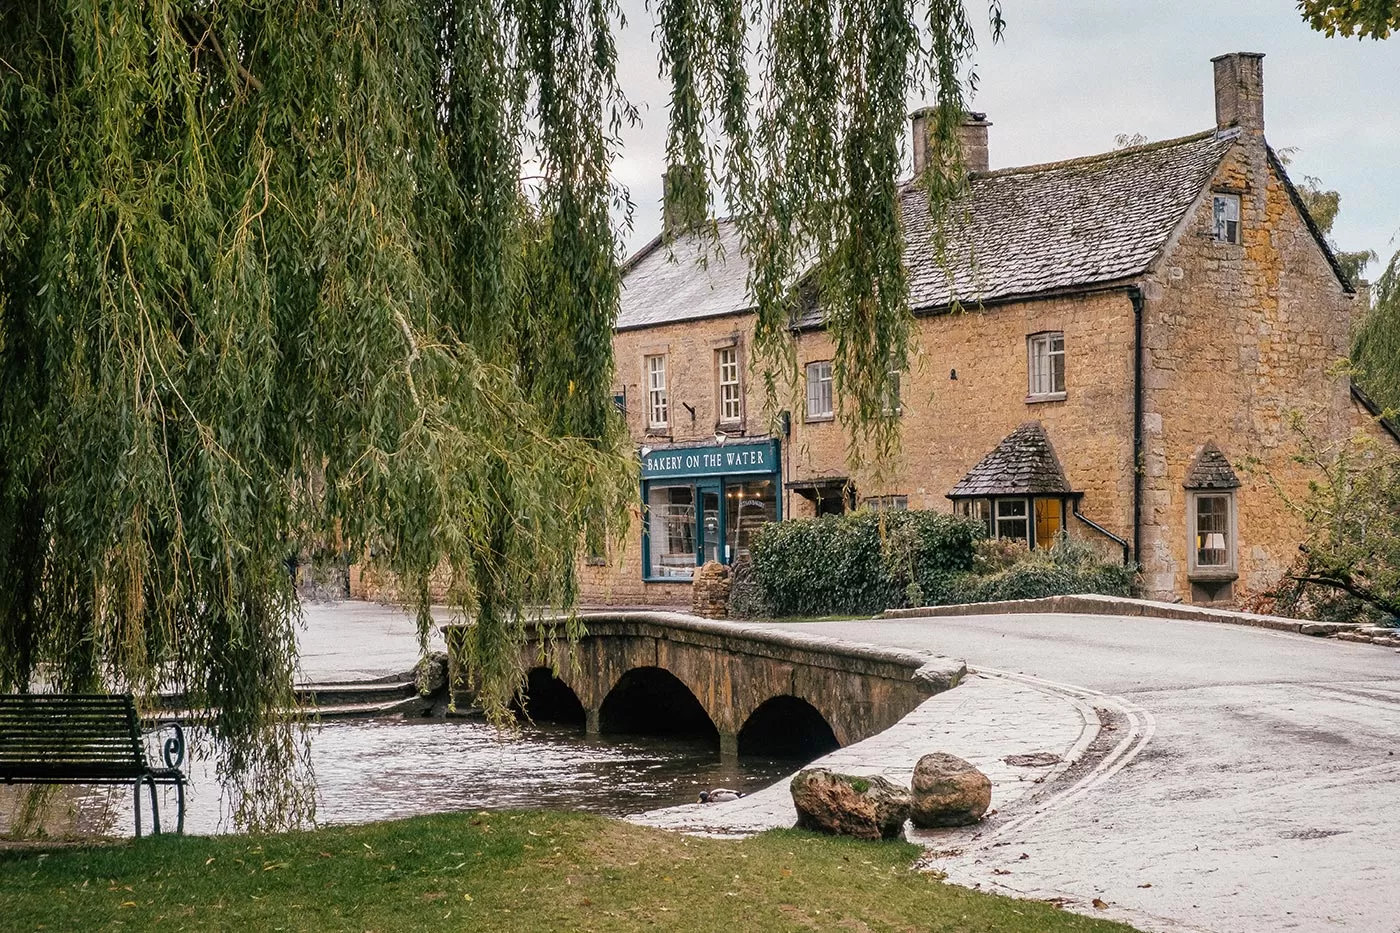 How to Get to The Cotswolds - Bourton-on-the-Water